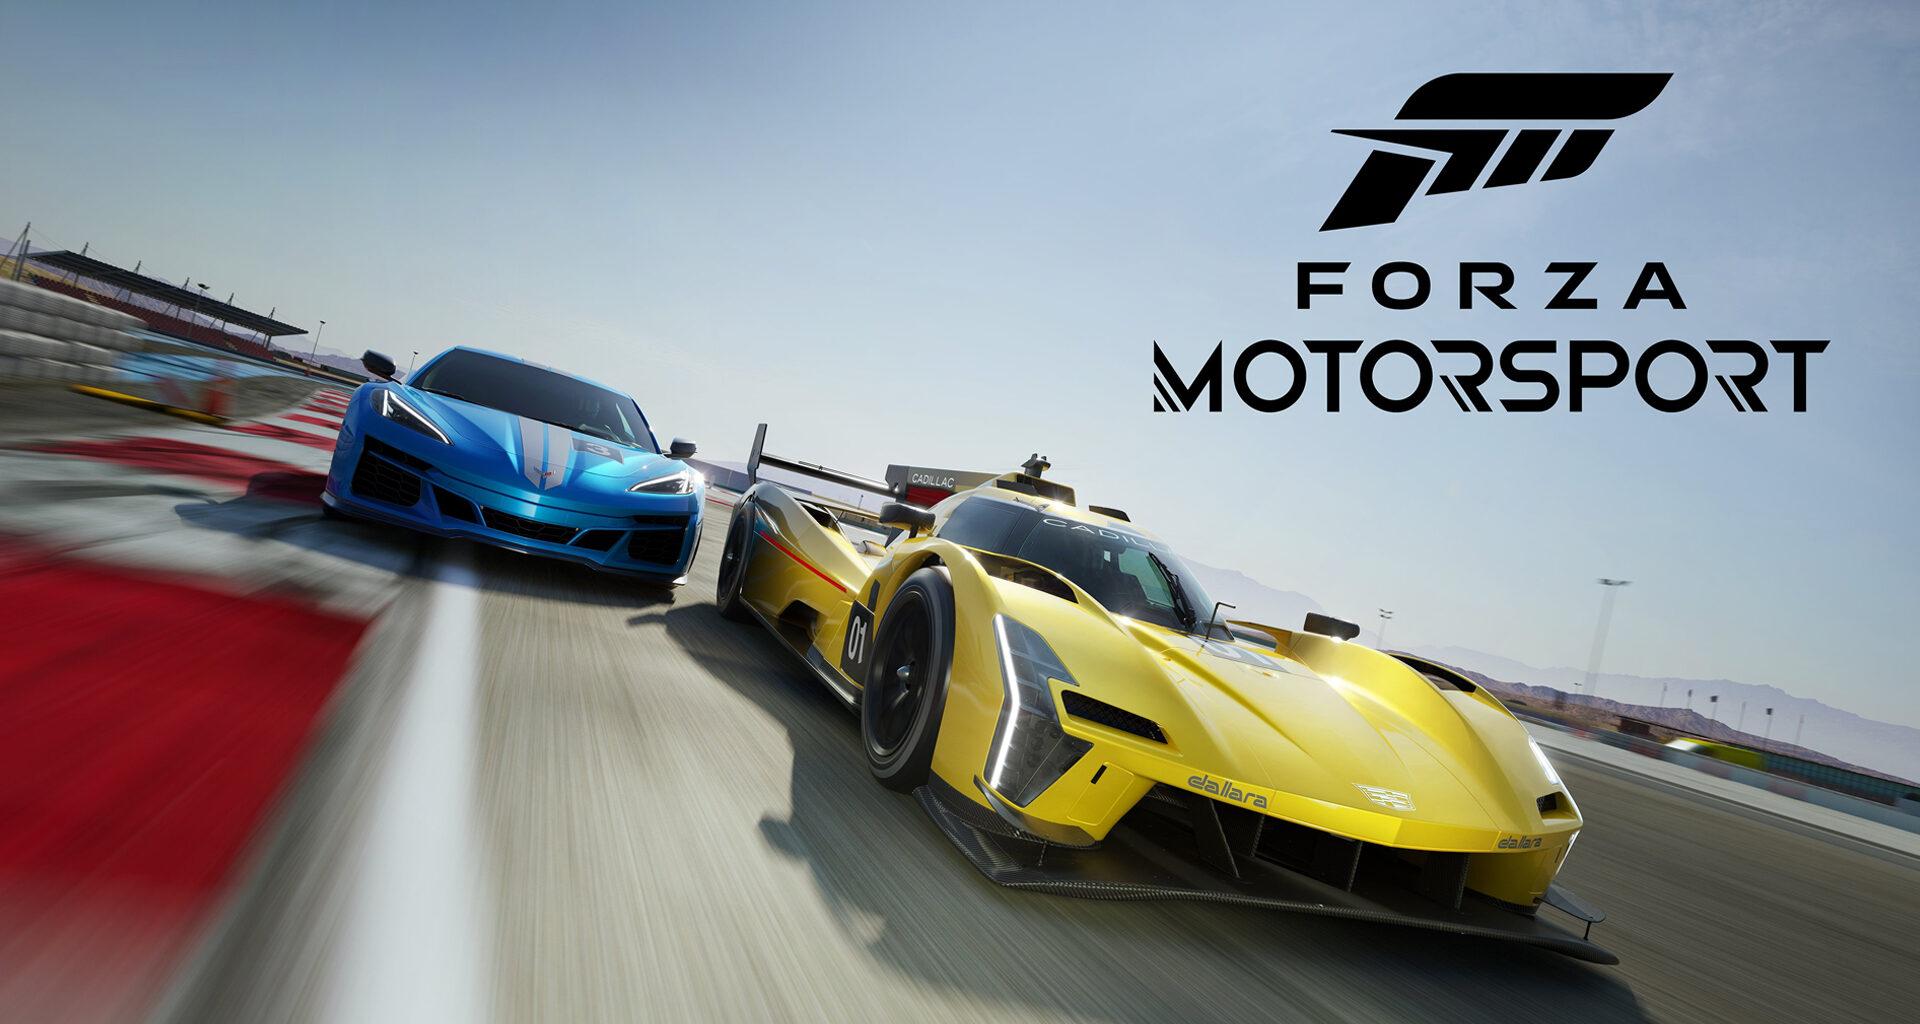 Cadillac GTP, Corvette E-Ray on Forza Motorsport's cover, details 11th June